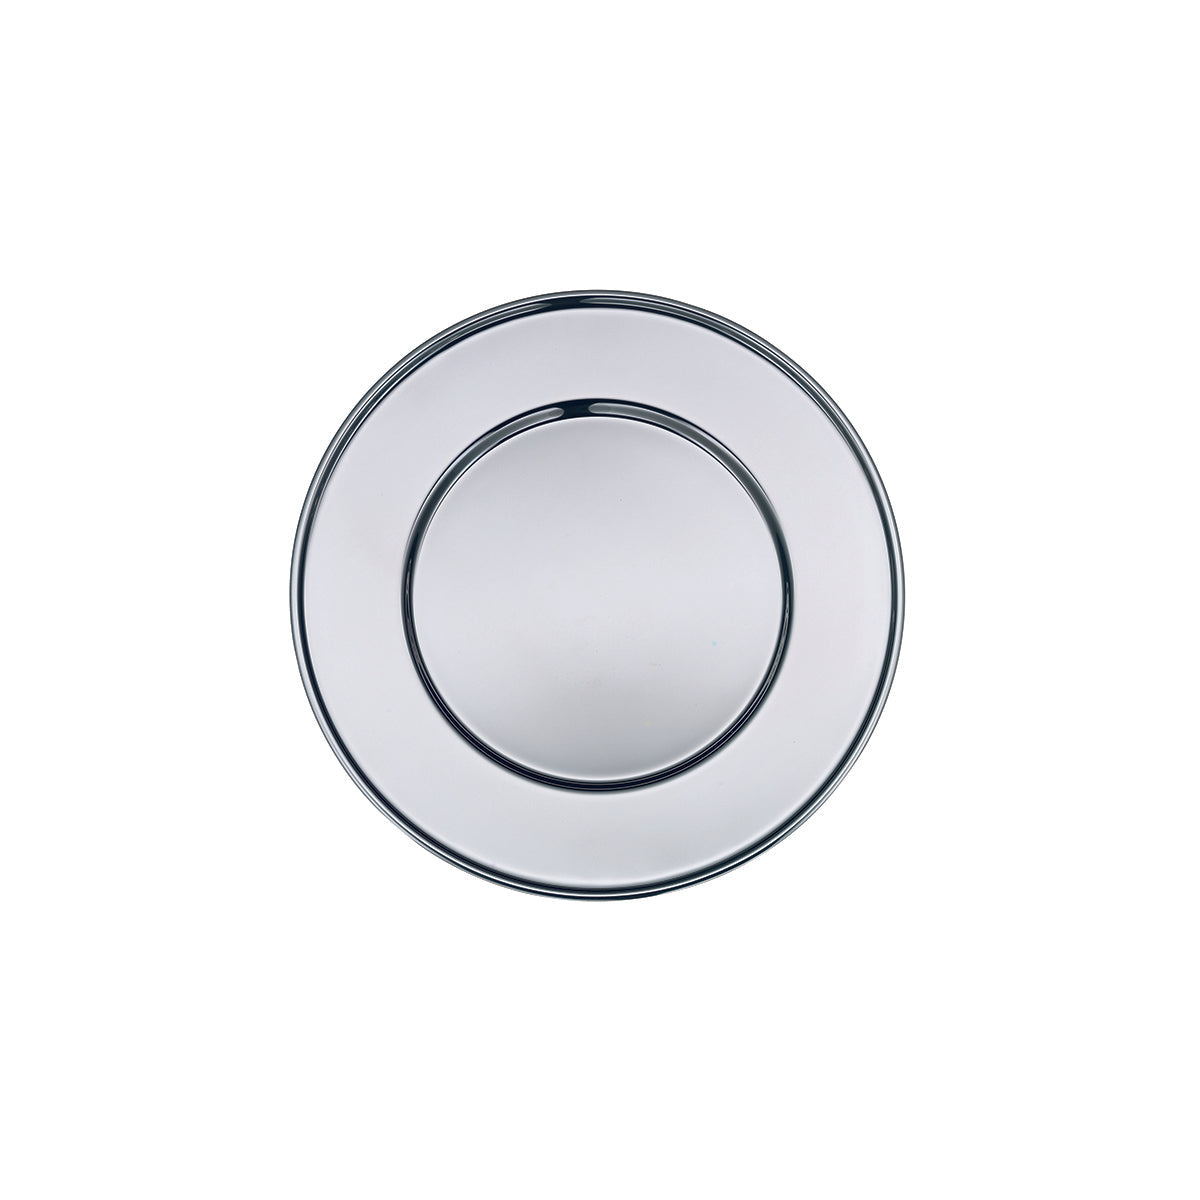 19.7416.6440 WMF Classic Round Plate / Tray 320mm Silverplated Tomkin Australia Hospitality Supplies